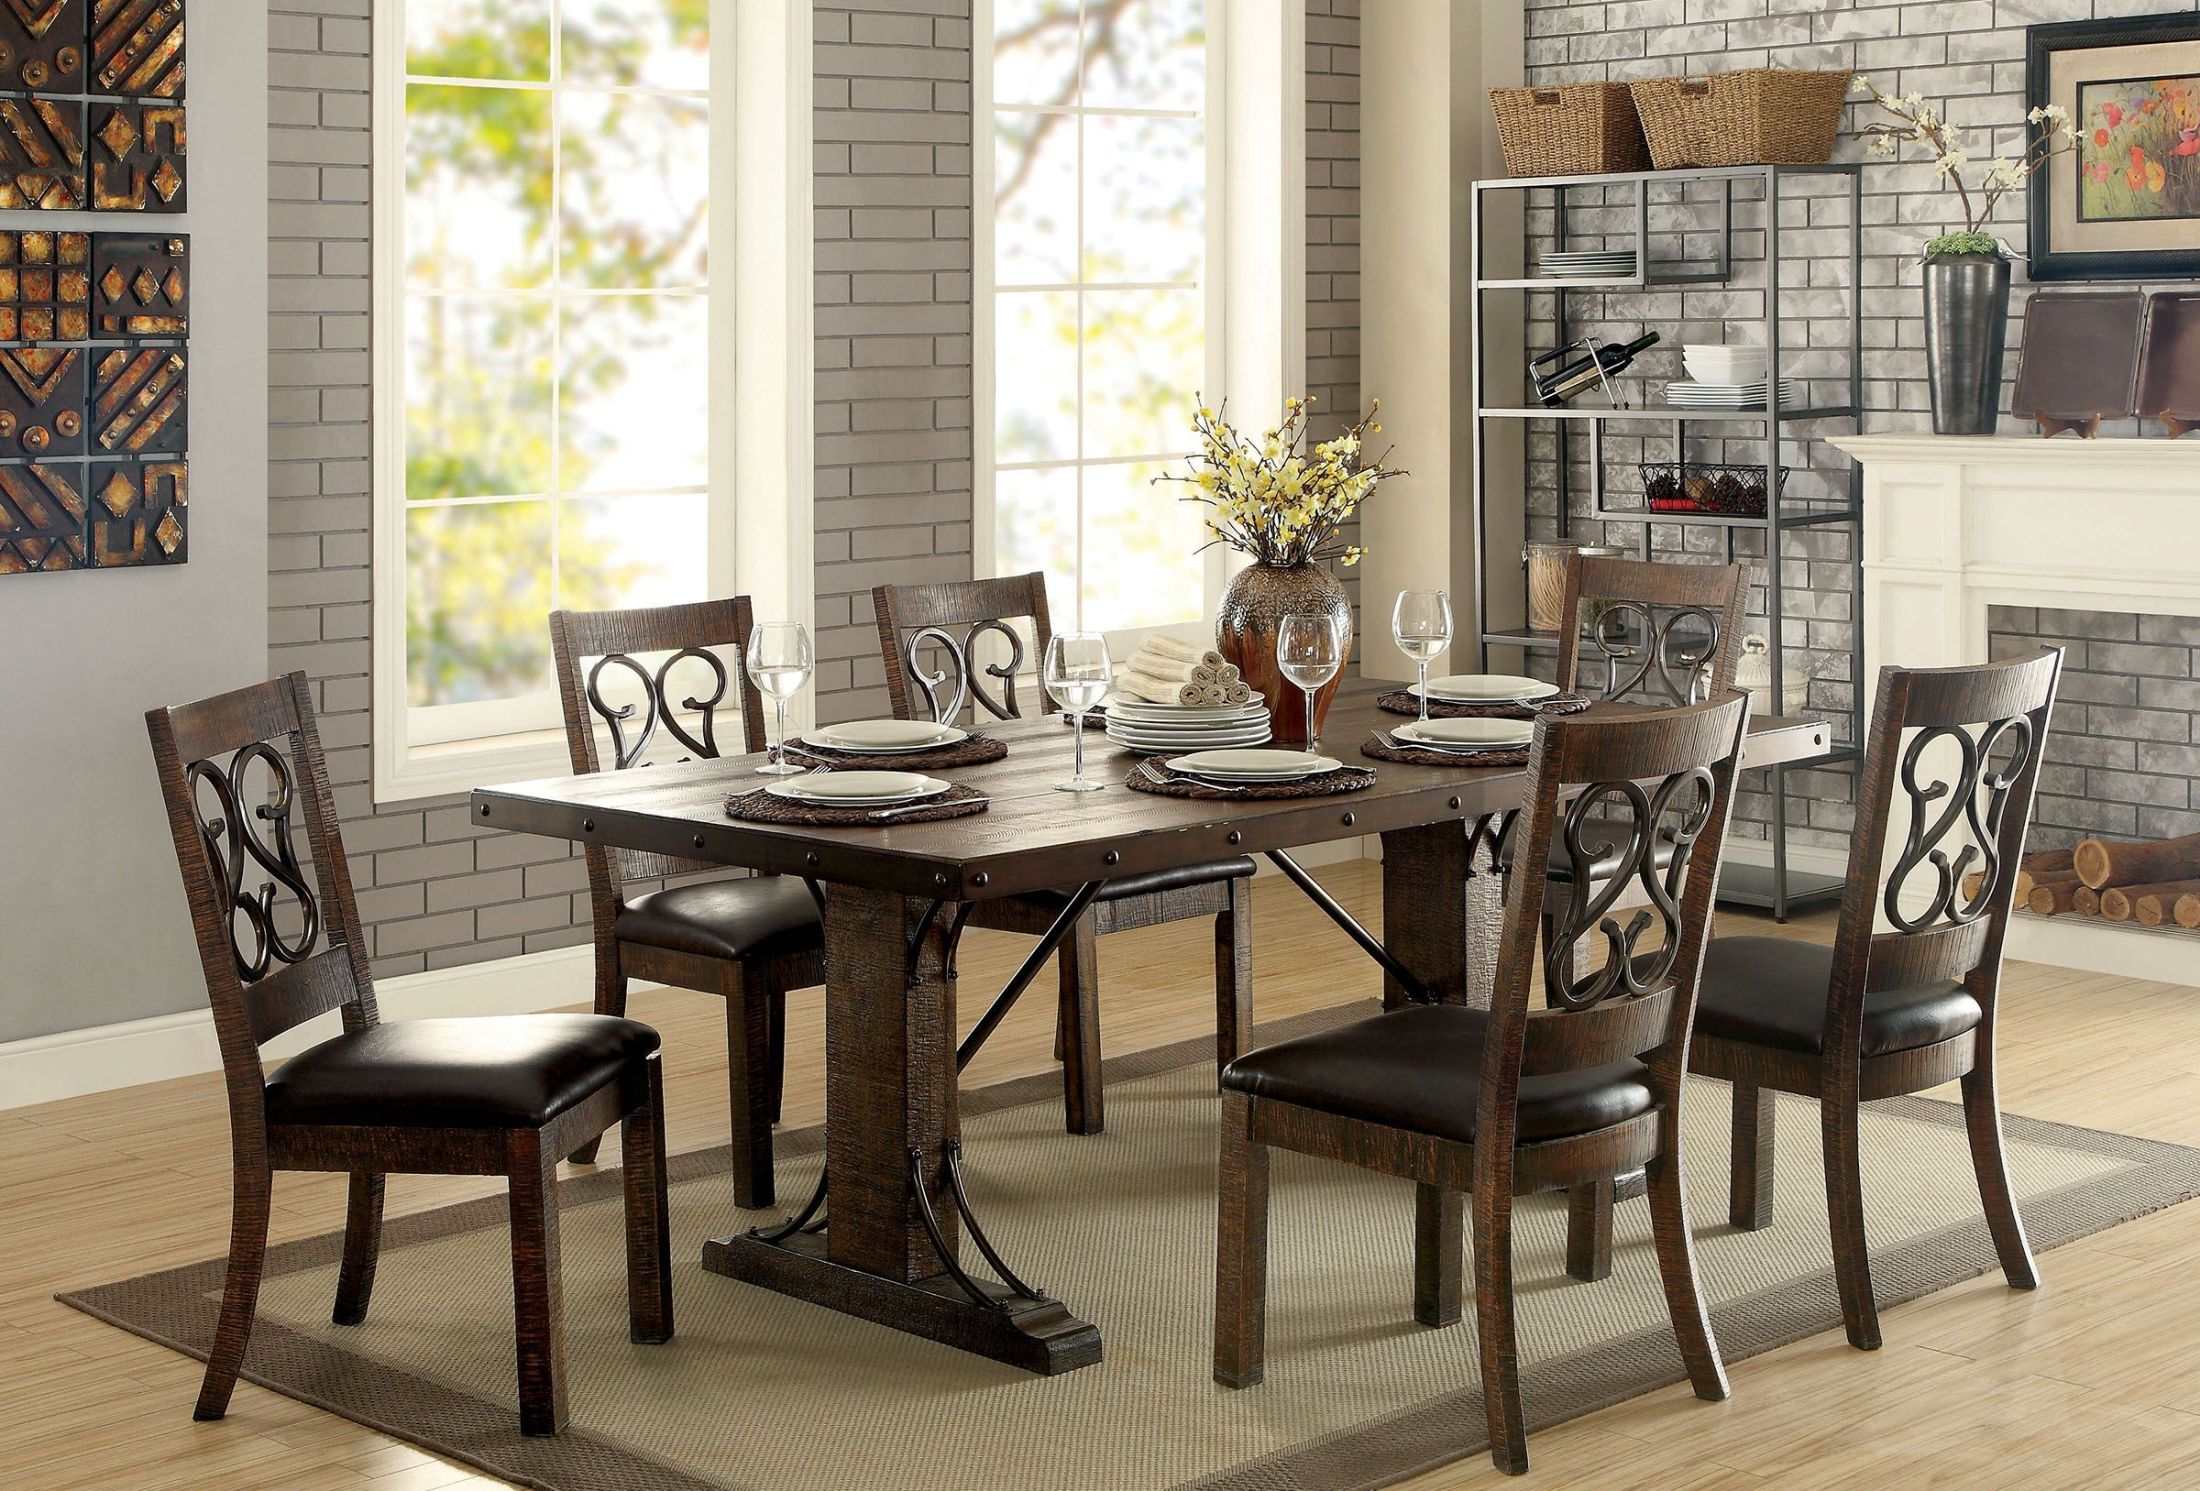 Jamestown Rustic Dining Room Set With Bench